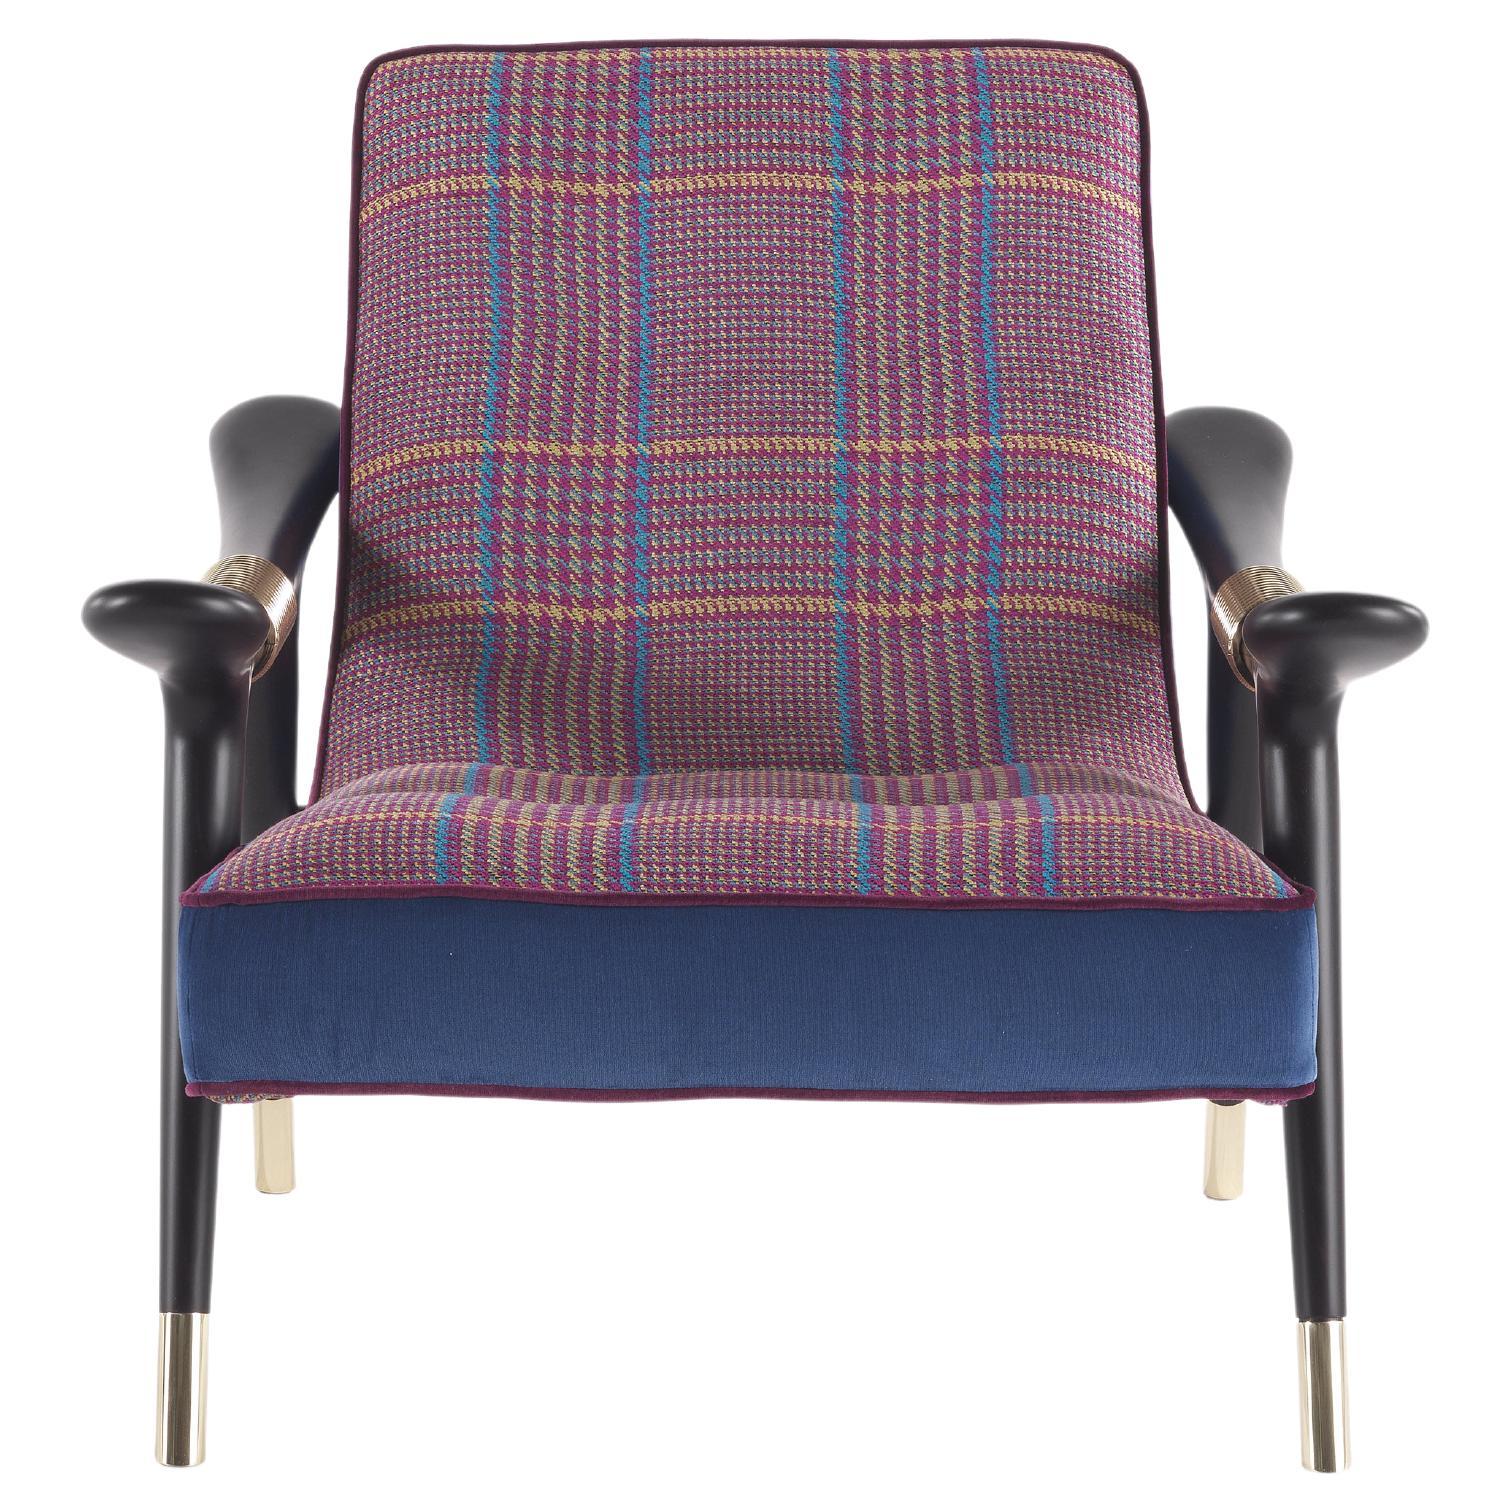 21st Century Masai Armchair in Overdose Fabric by Etro Home Interiors For Sale